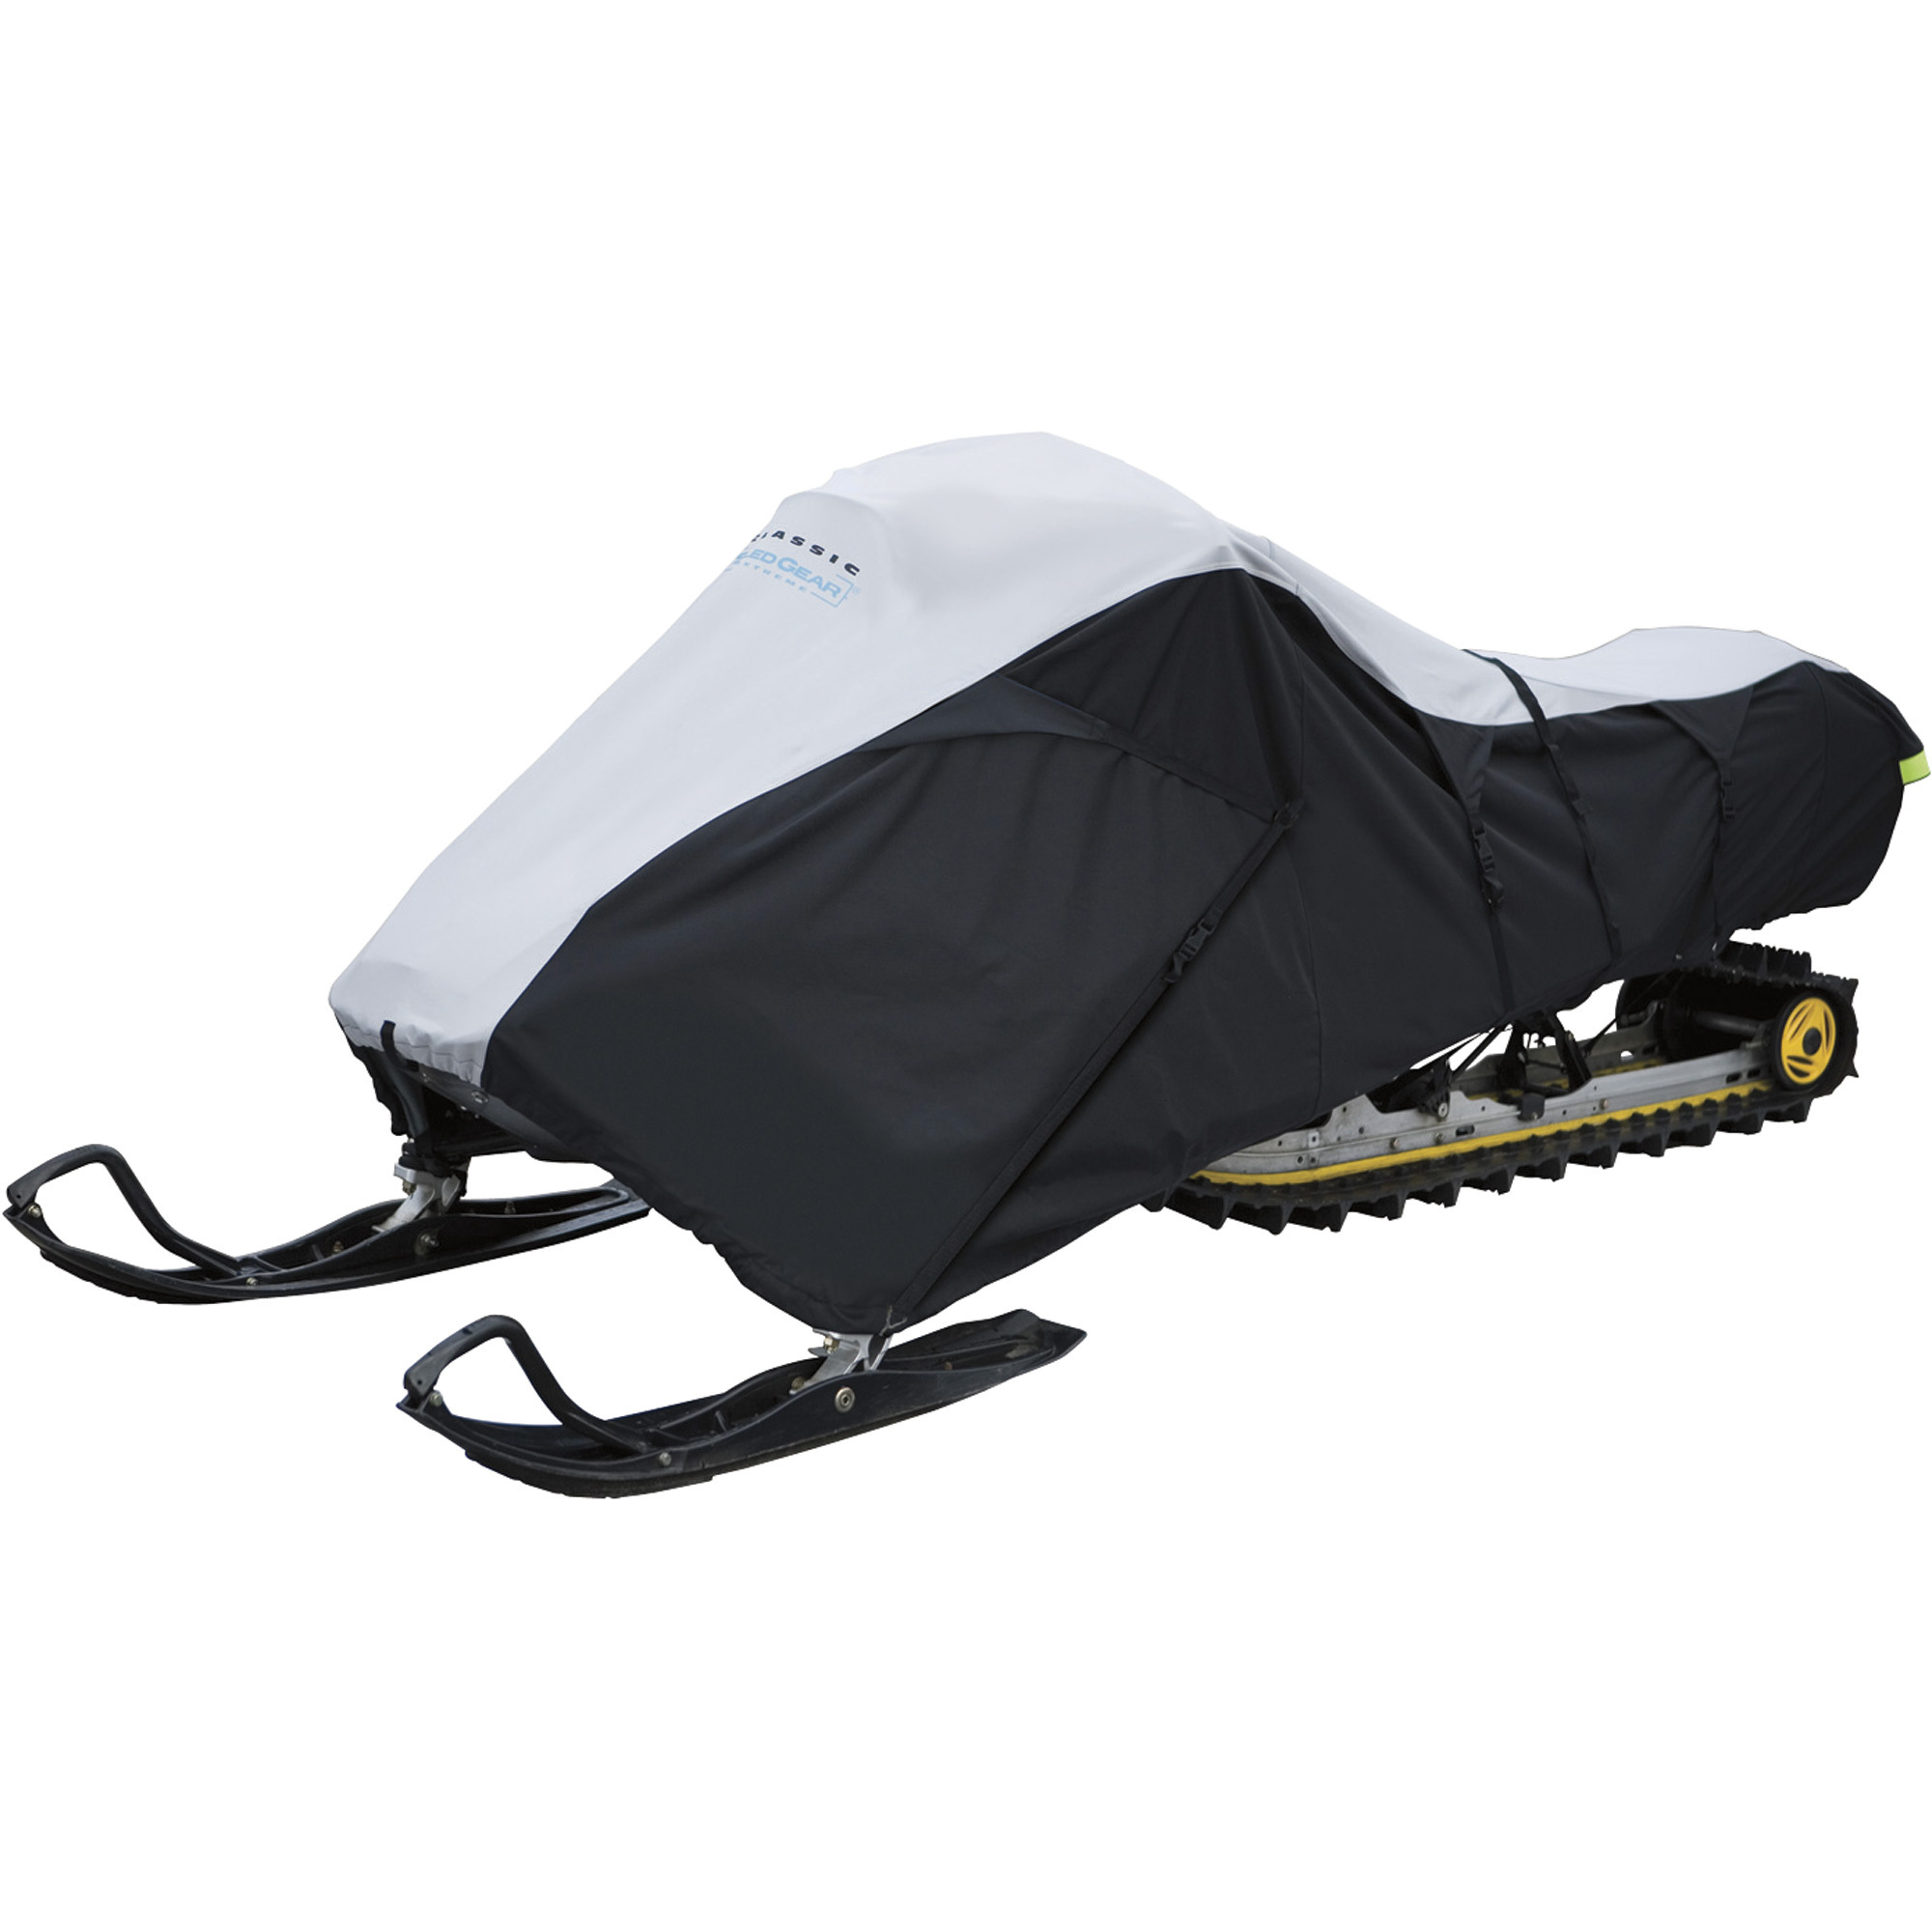 Classic Accessories SledGear Deluxe Snowmobile Cover, X-Large, Model 71847